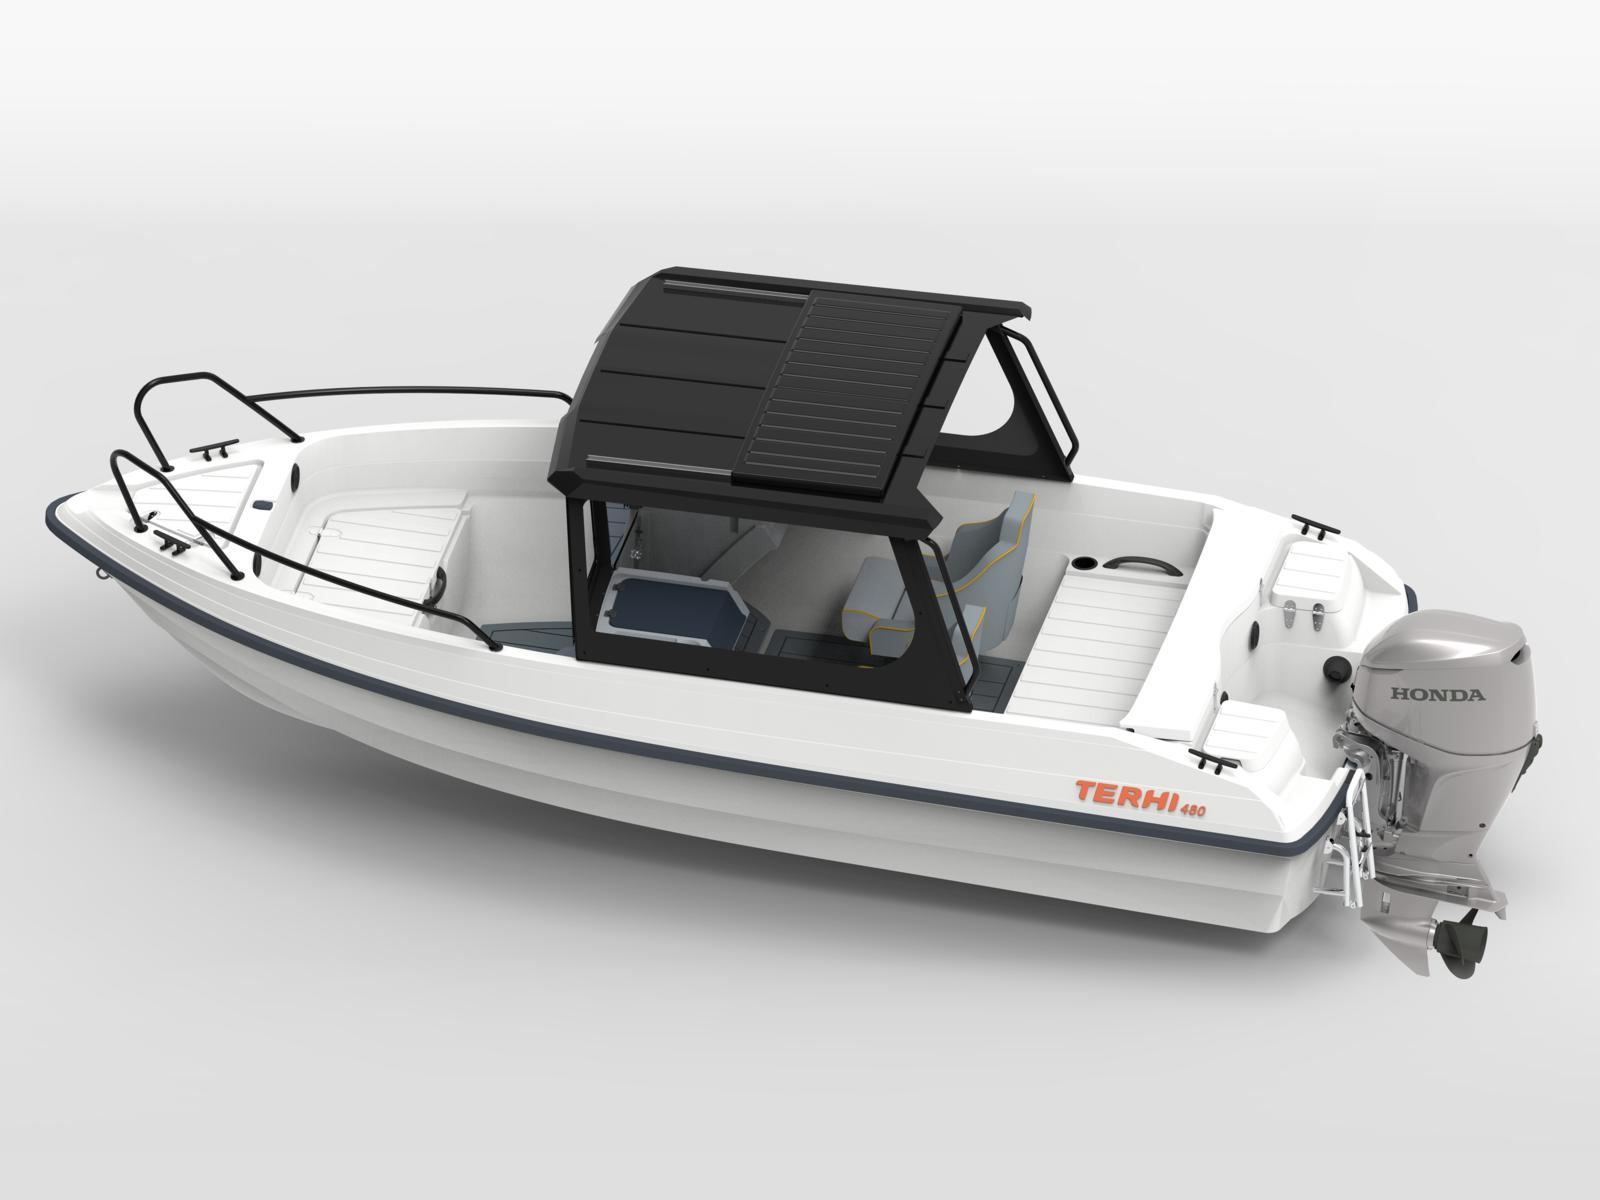 Terhi 480 Cabin | Boat Solutions, Utting am Ammersee